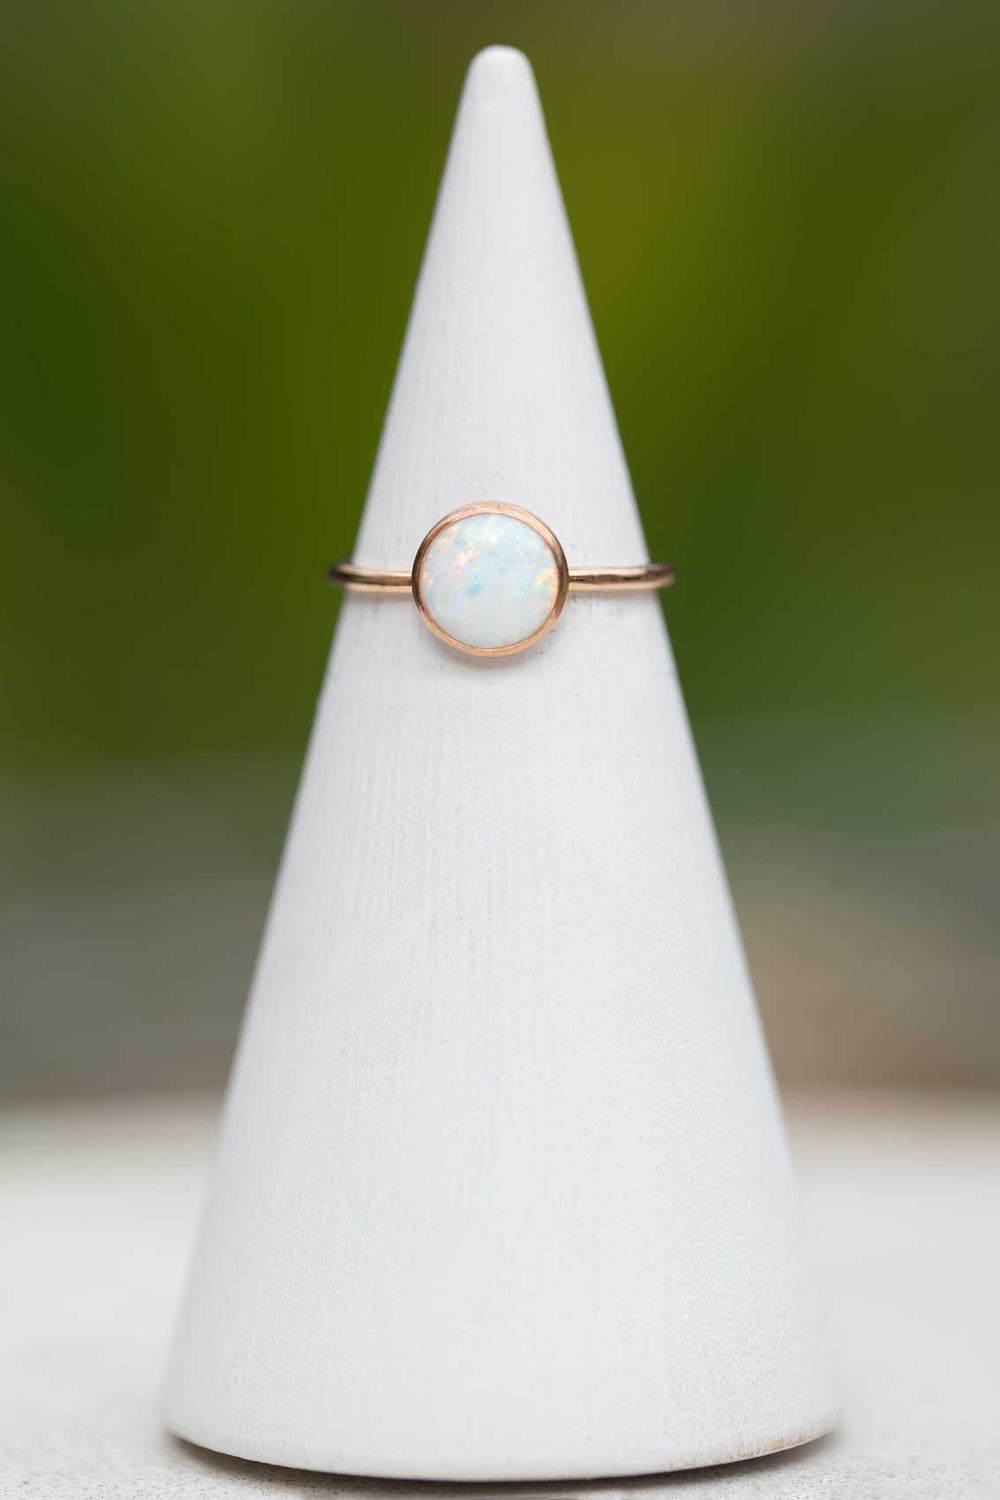 Mineral and Matter Jewelry Opal Large Ring Opal Ring Real Opal Ring Mineral and Matter Opal Ring